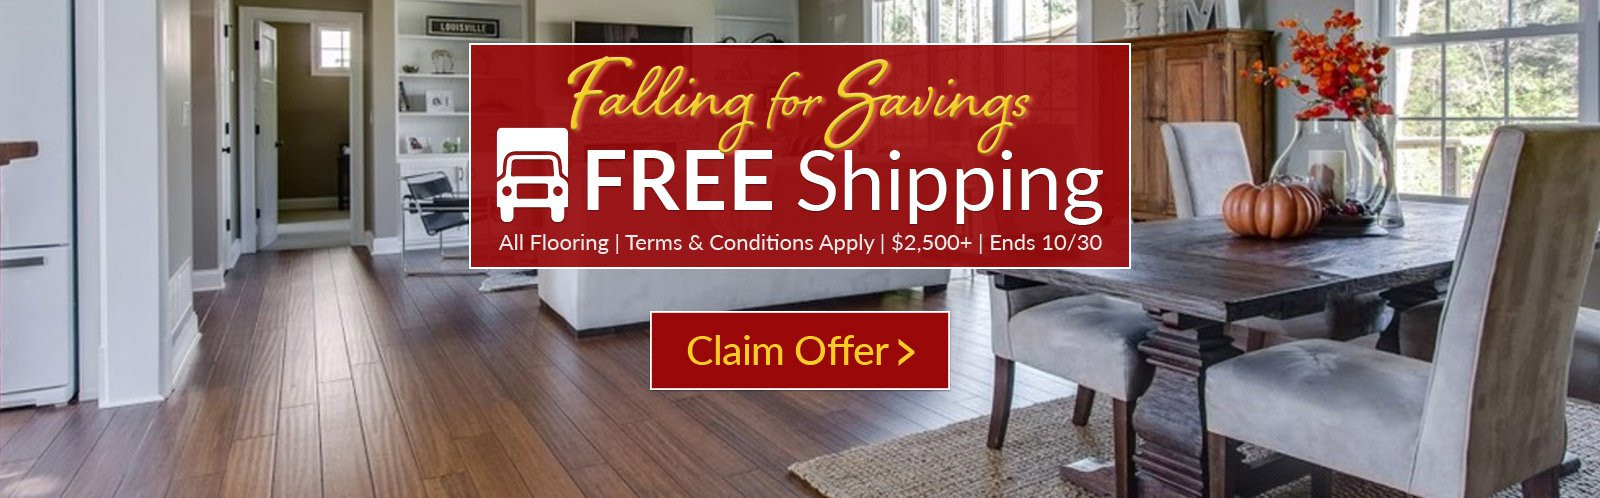 11 Lovable Hardwood Floor Refinishing Sacramento 2024 free download hardwood floor refinishing sacramento of green building construction materials and home decor cali bamboo intended for your shopping cart is empty